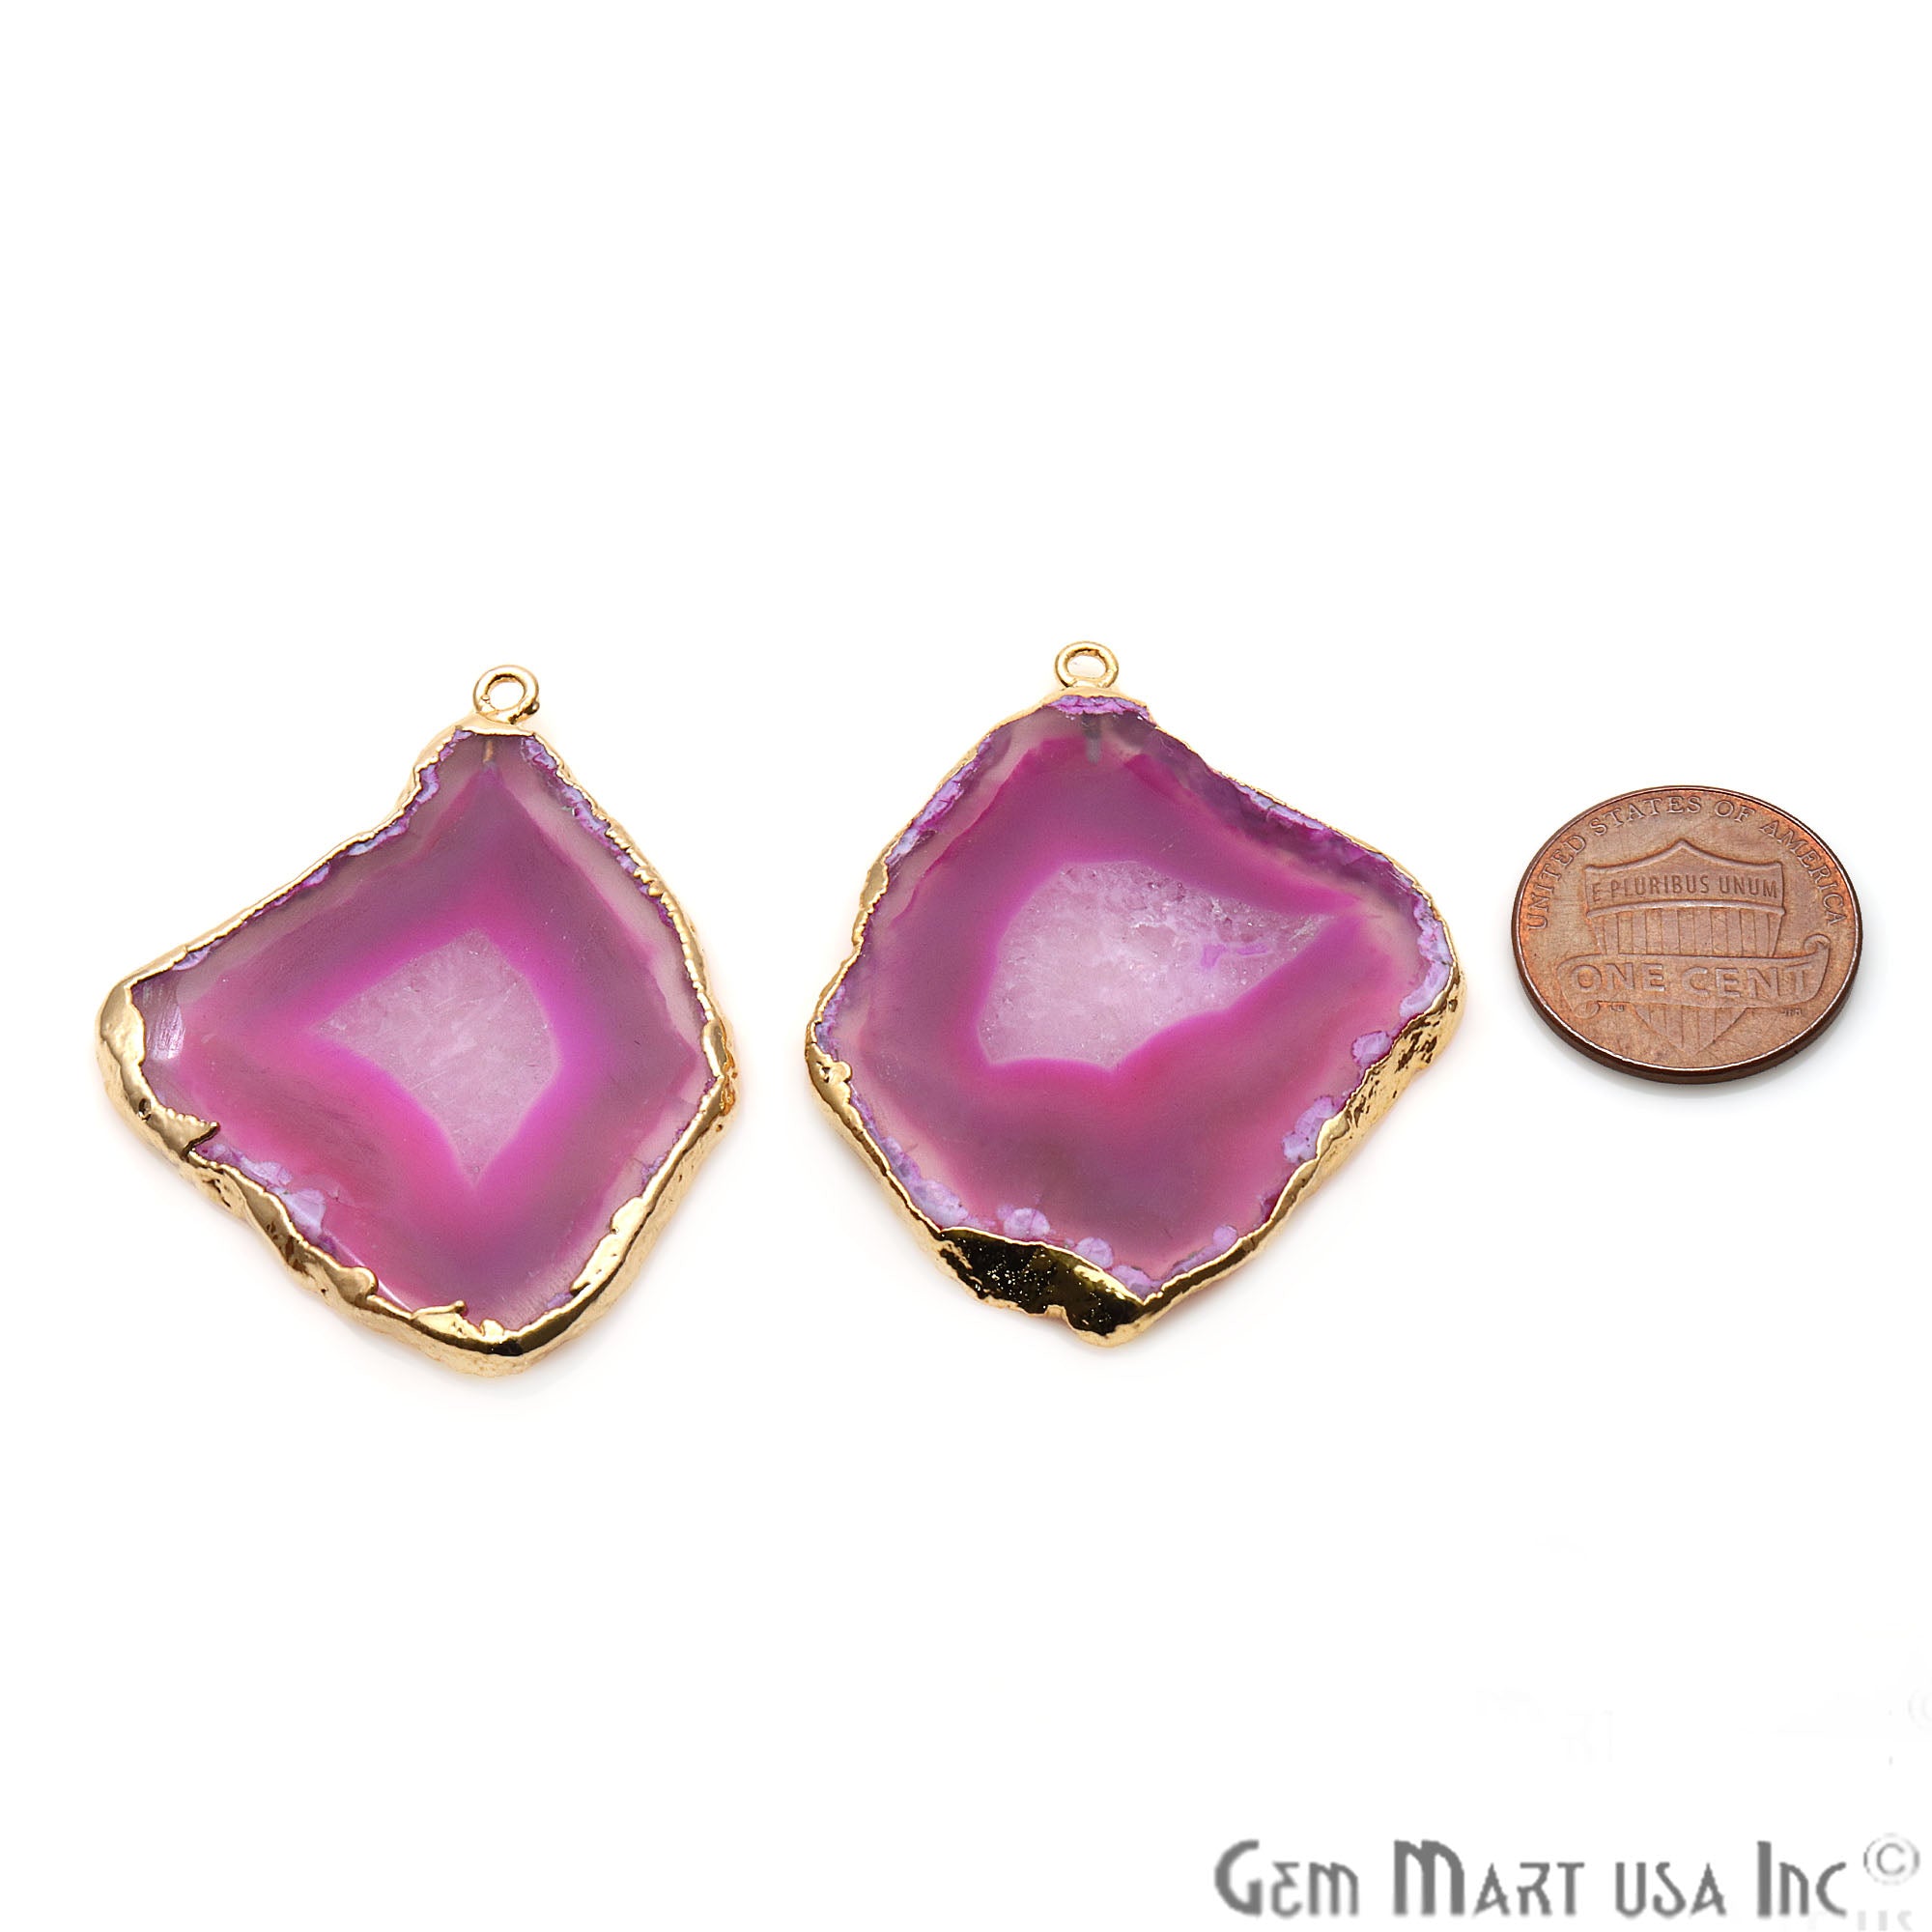 Agate Slice 43x36mm Organic Gold Electroplated Gemstone Earring Connector 1 Pair - GemMartUSA